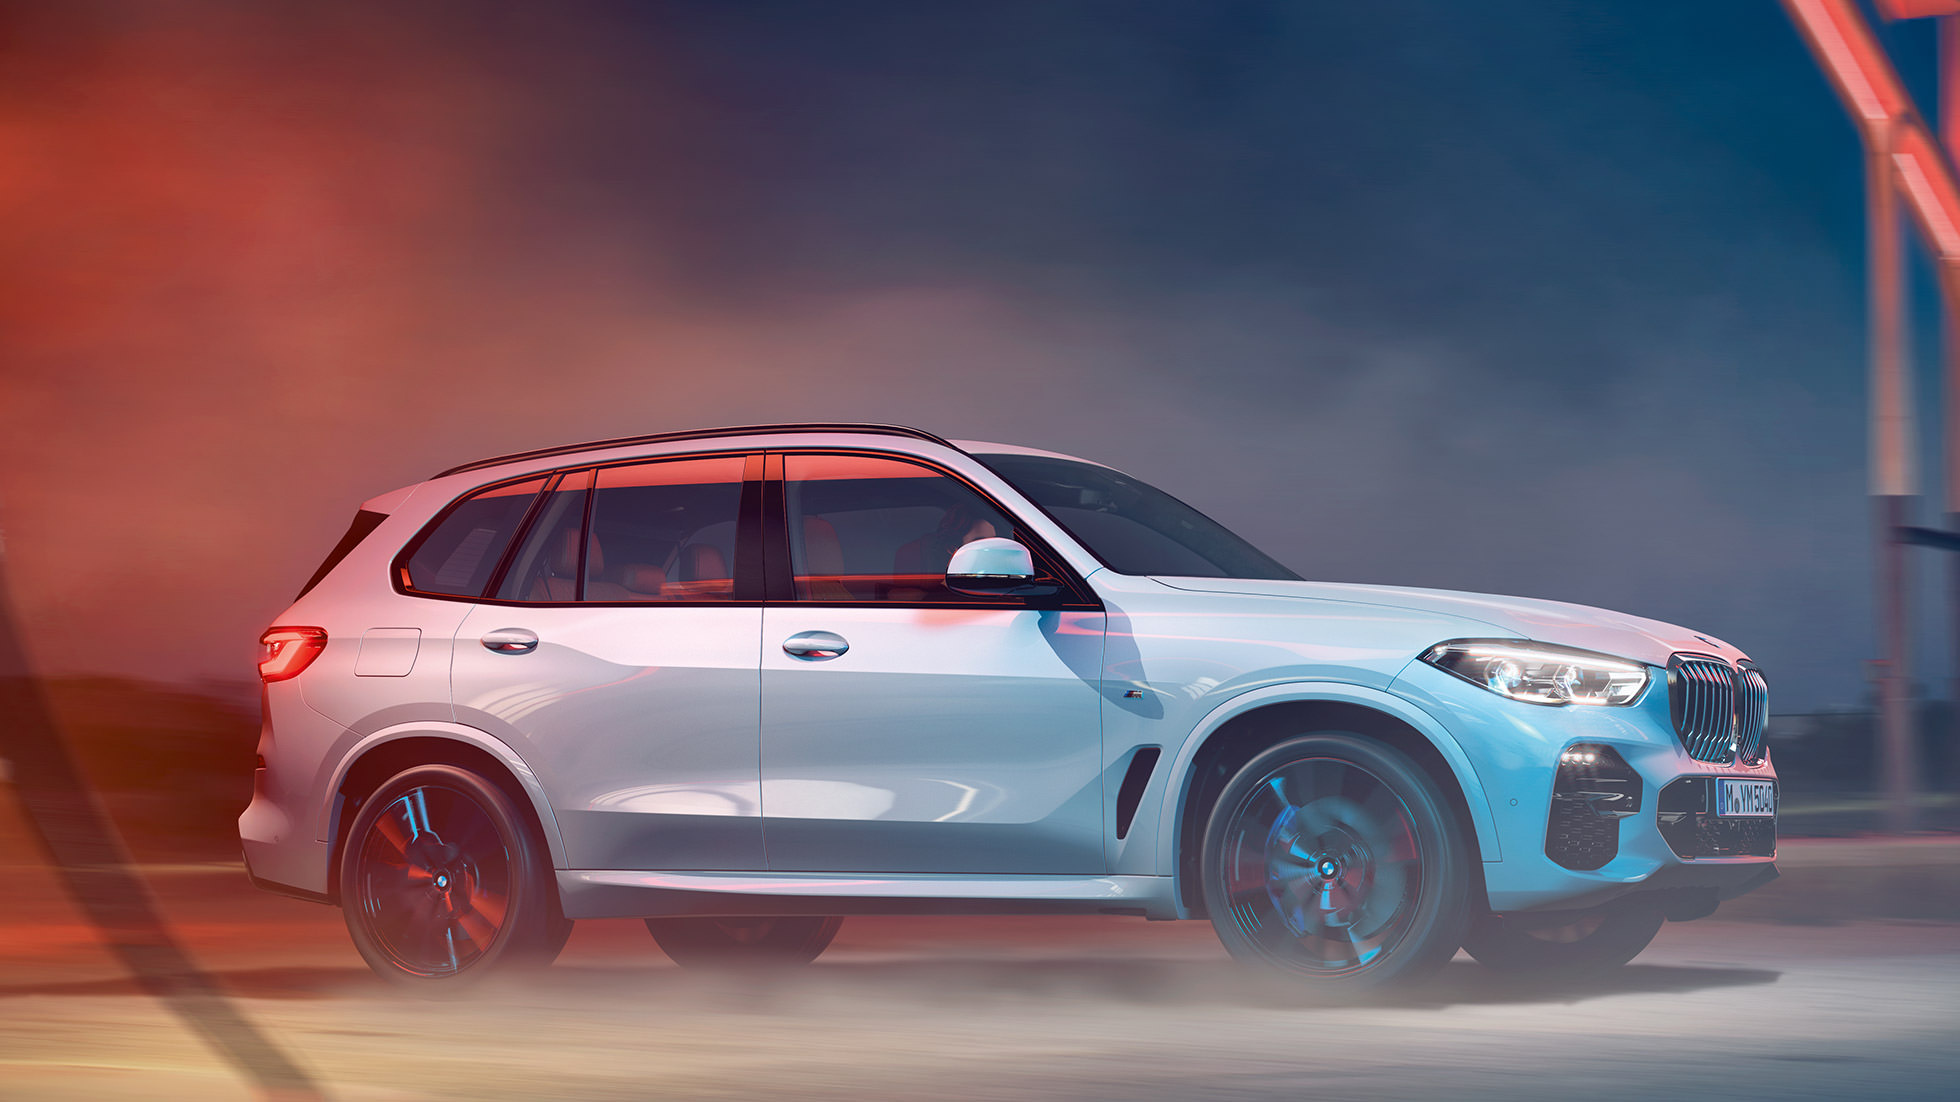 BMW X5, Special offers, New X5 model, Exciting promotions, 1960x1110 HD Desktop